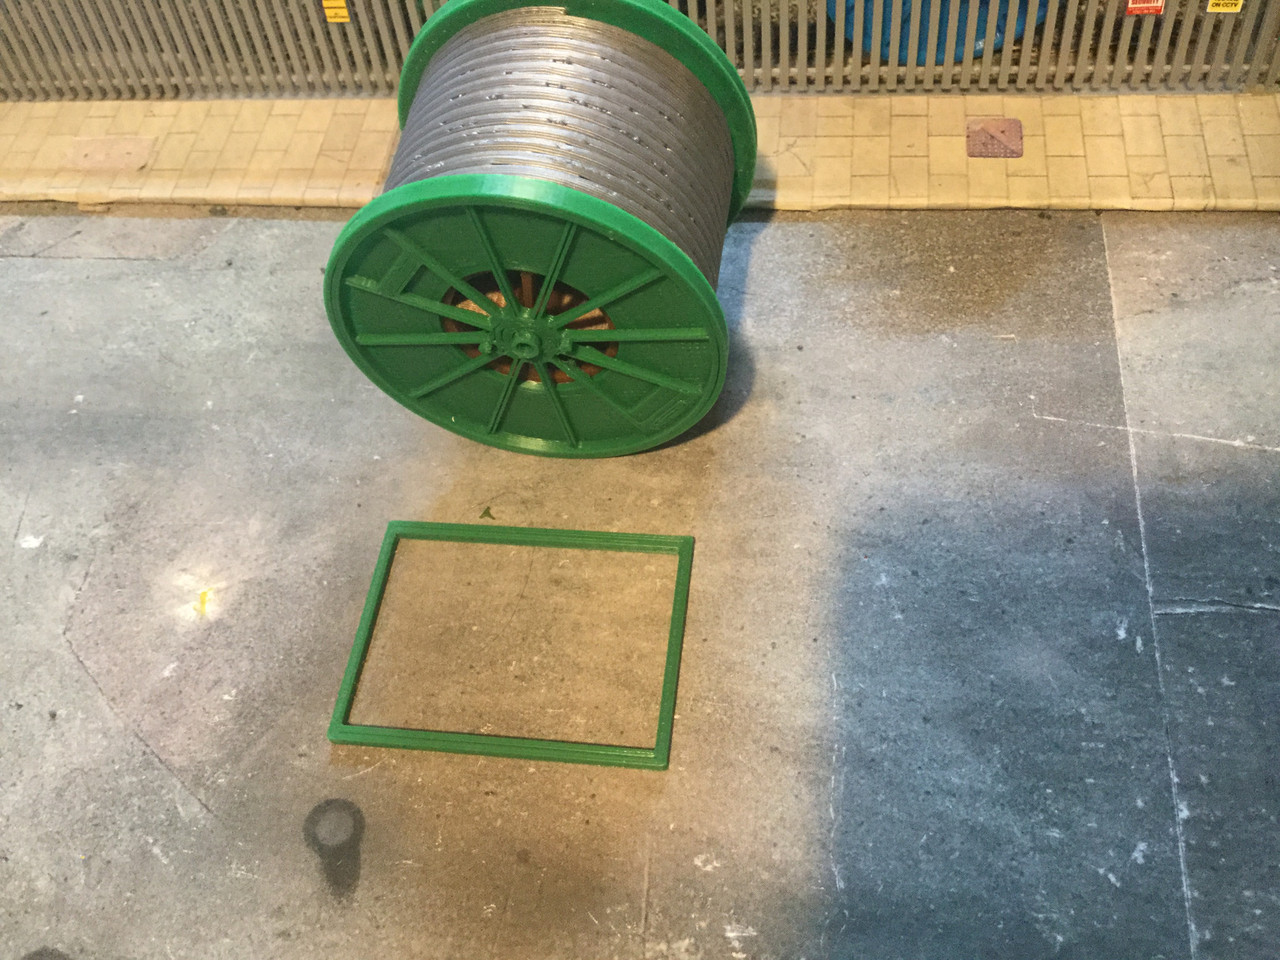 1x 1:76 scale 3D printed Large Coil Drum trailer load